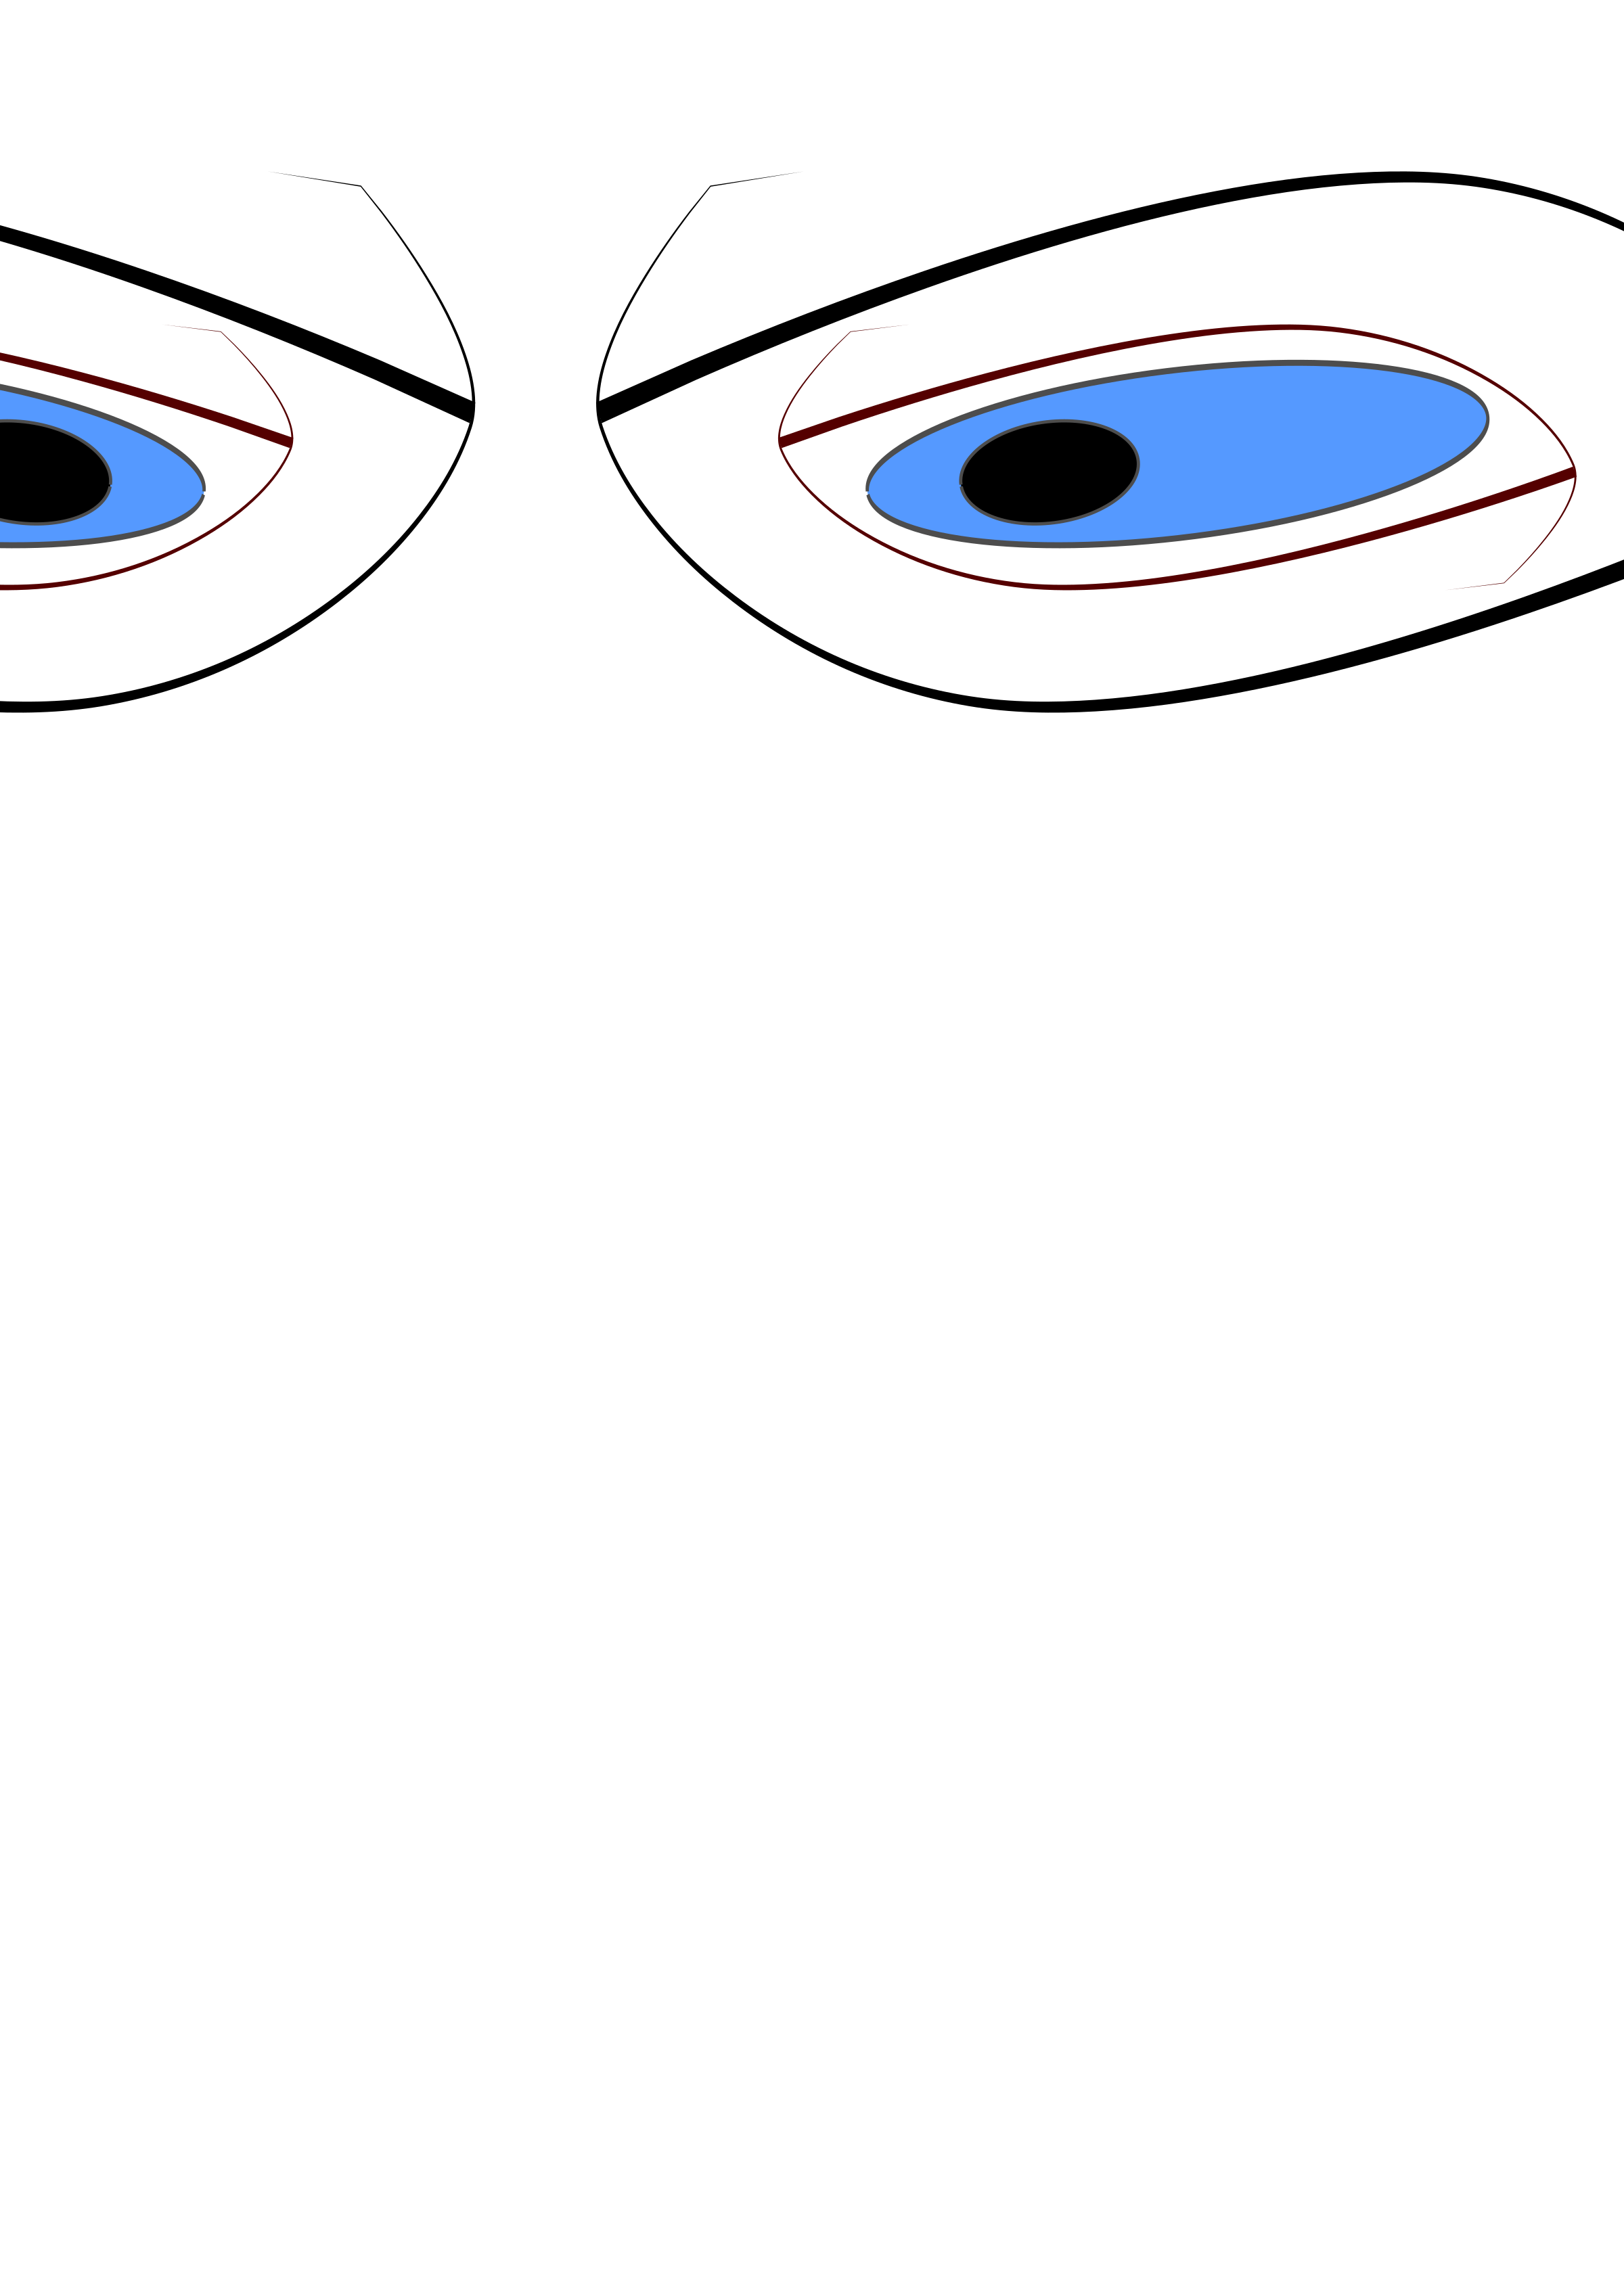 Pair of bad eyes PNG icon